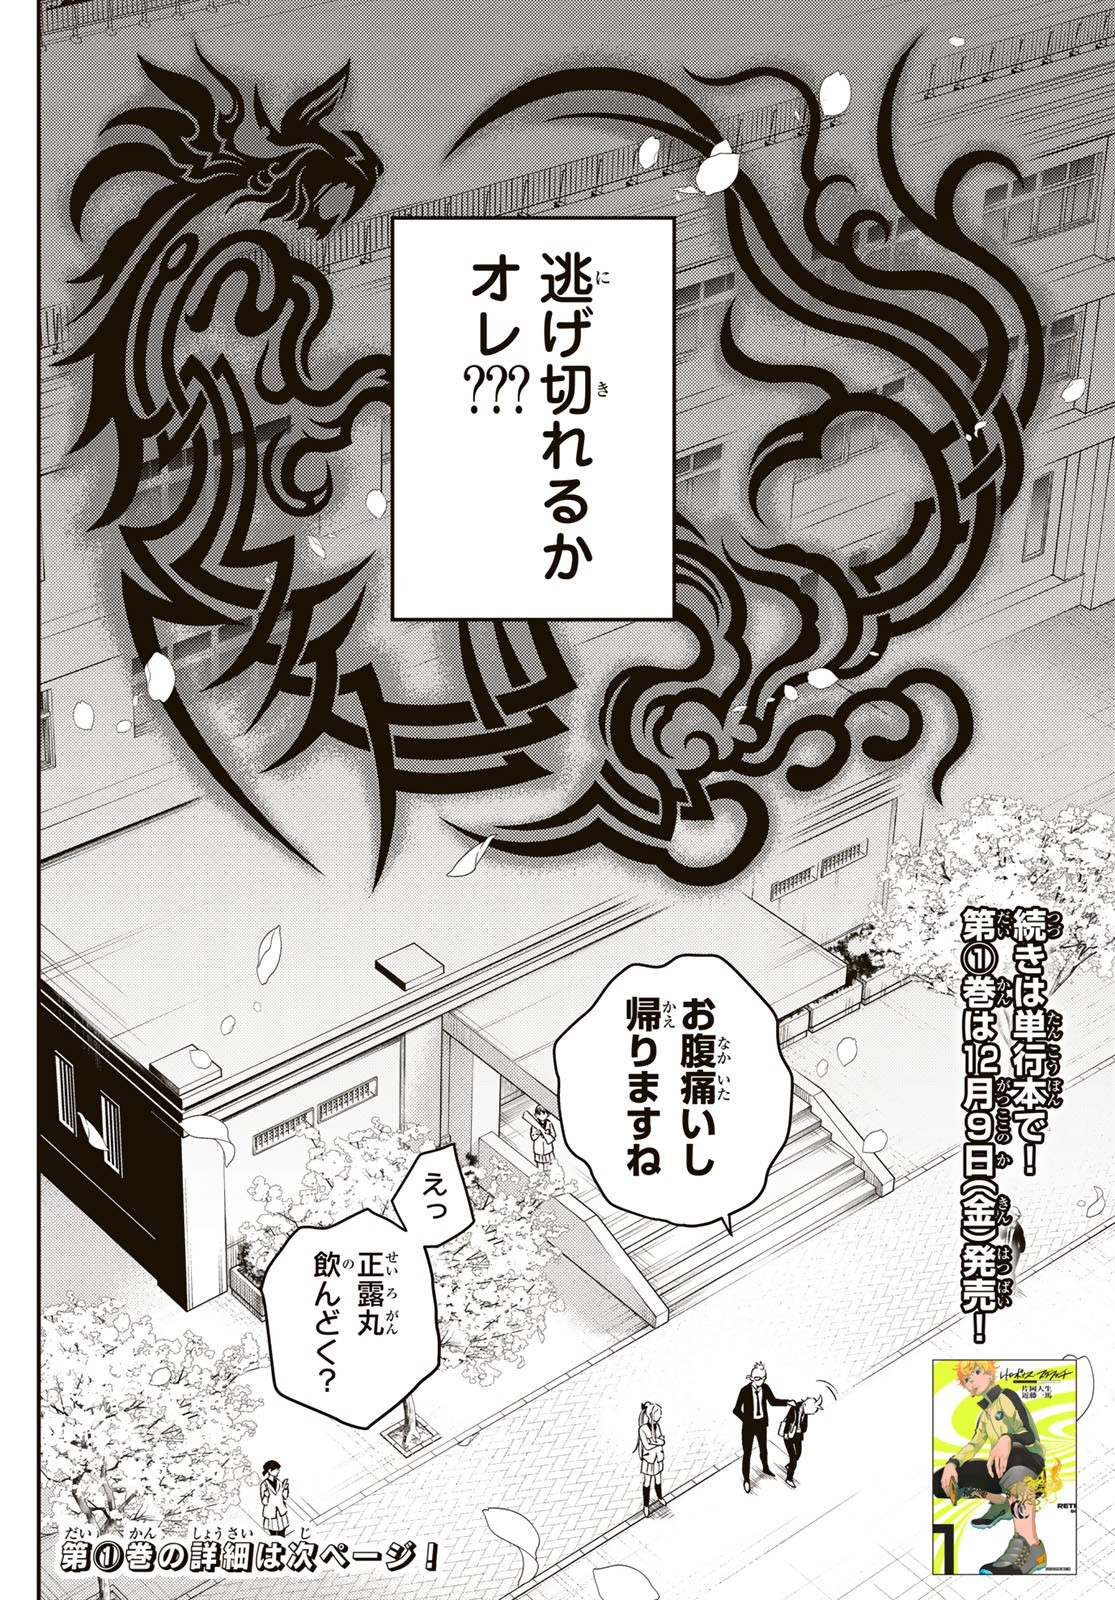 Weekly Shōnen Magazine - 週刊少年マガジン - Chapter 2023-01 - Page 644